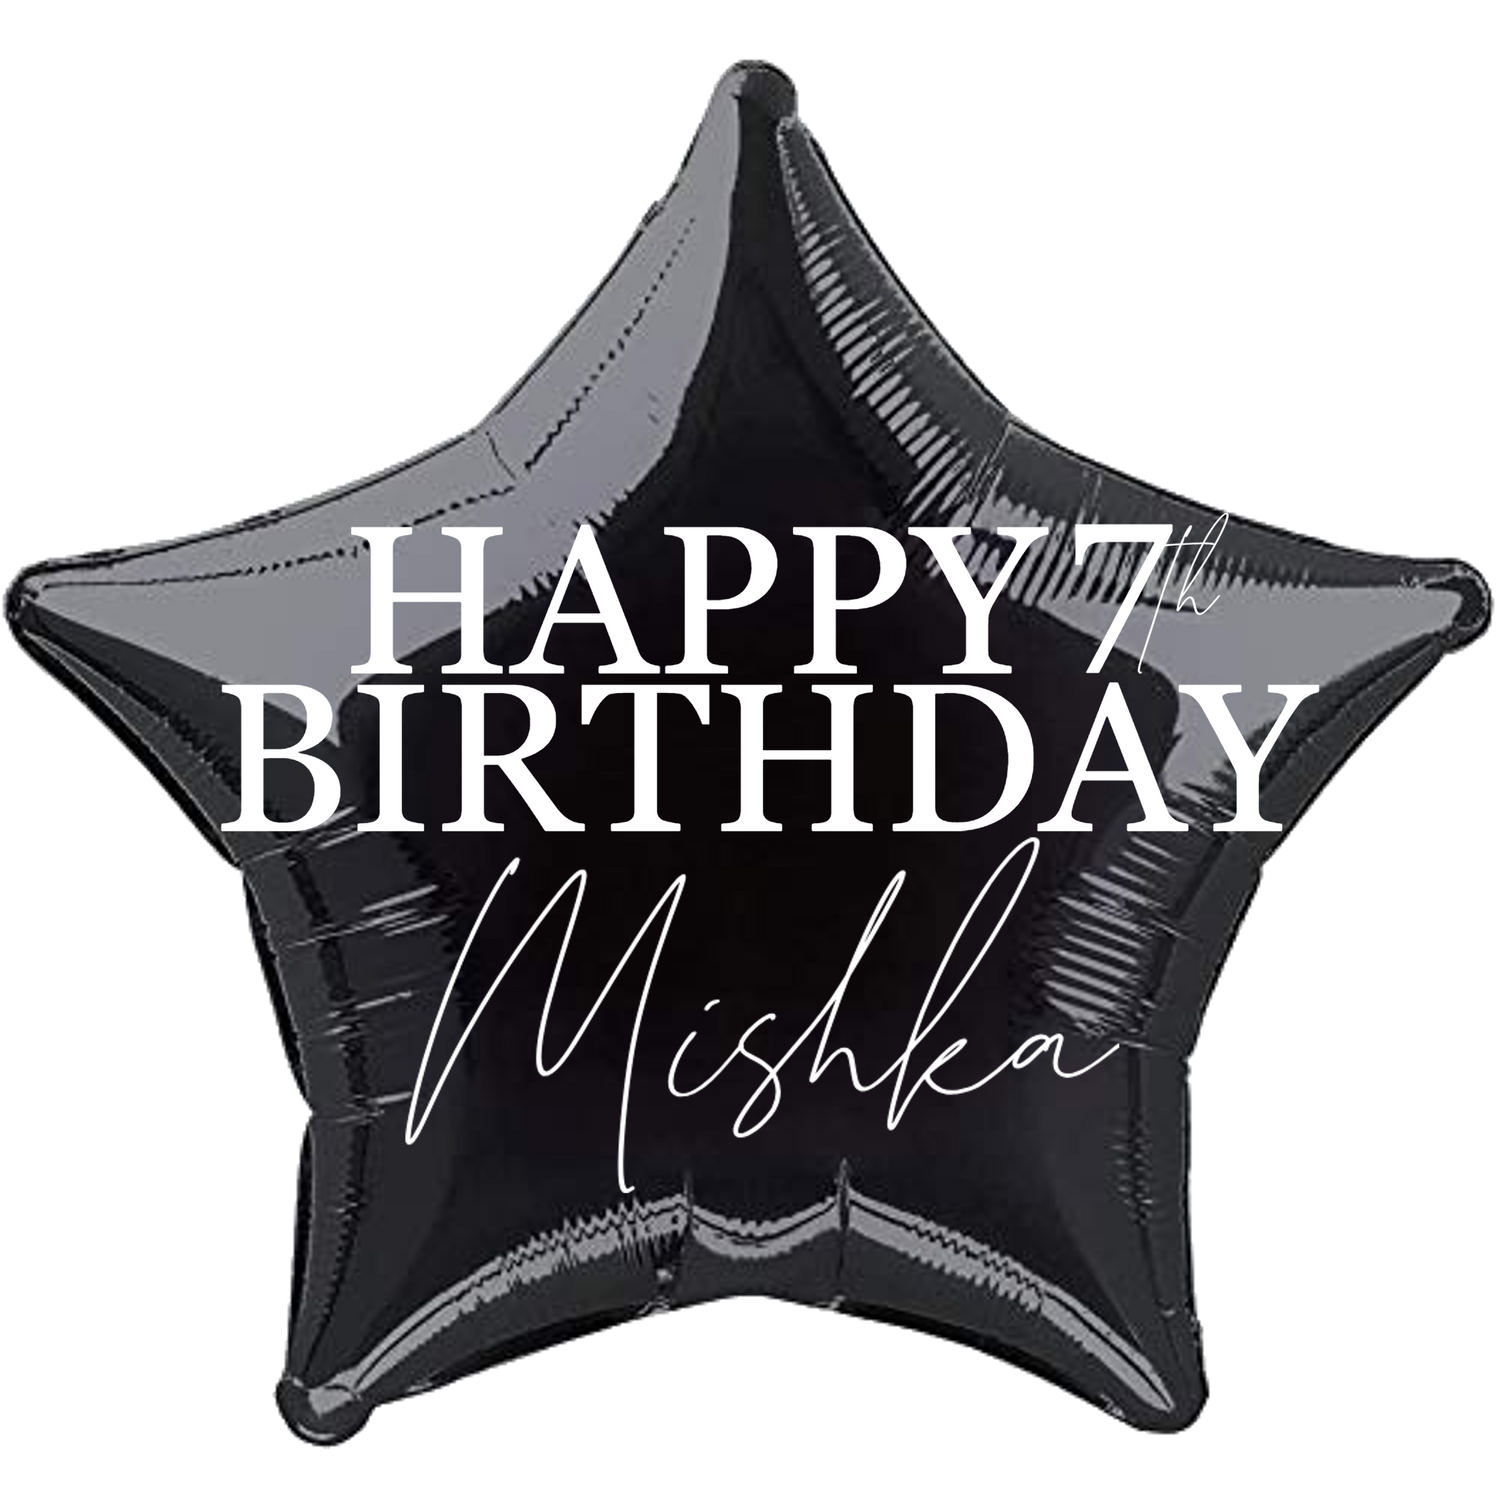 Personalized/Customized Custom Name/Text & Age Black Star Foil/Mylar Balloons For Six Months/First/Second/Third/Sixteenth/Twenty-First/Thirty/Forty/Fifty/Sixty/Seventieth Birthday, Milestone Birthday or a Special Themed Birthday Event. Supports Helium/Air, Luxury Bespoke Balloons Are a Perfect Surprise For Your Baby, Wife, Mom, Dad, Brother, Sister, Friends & Loved Ones